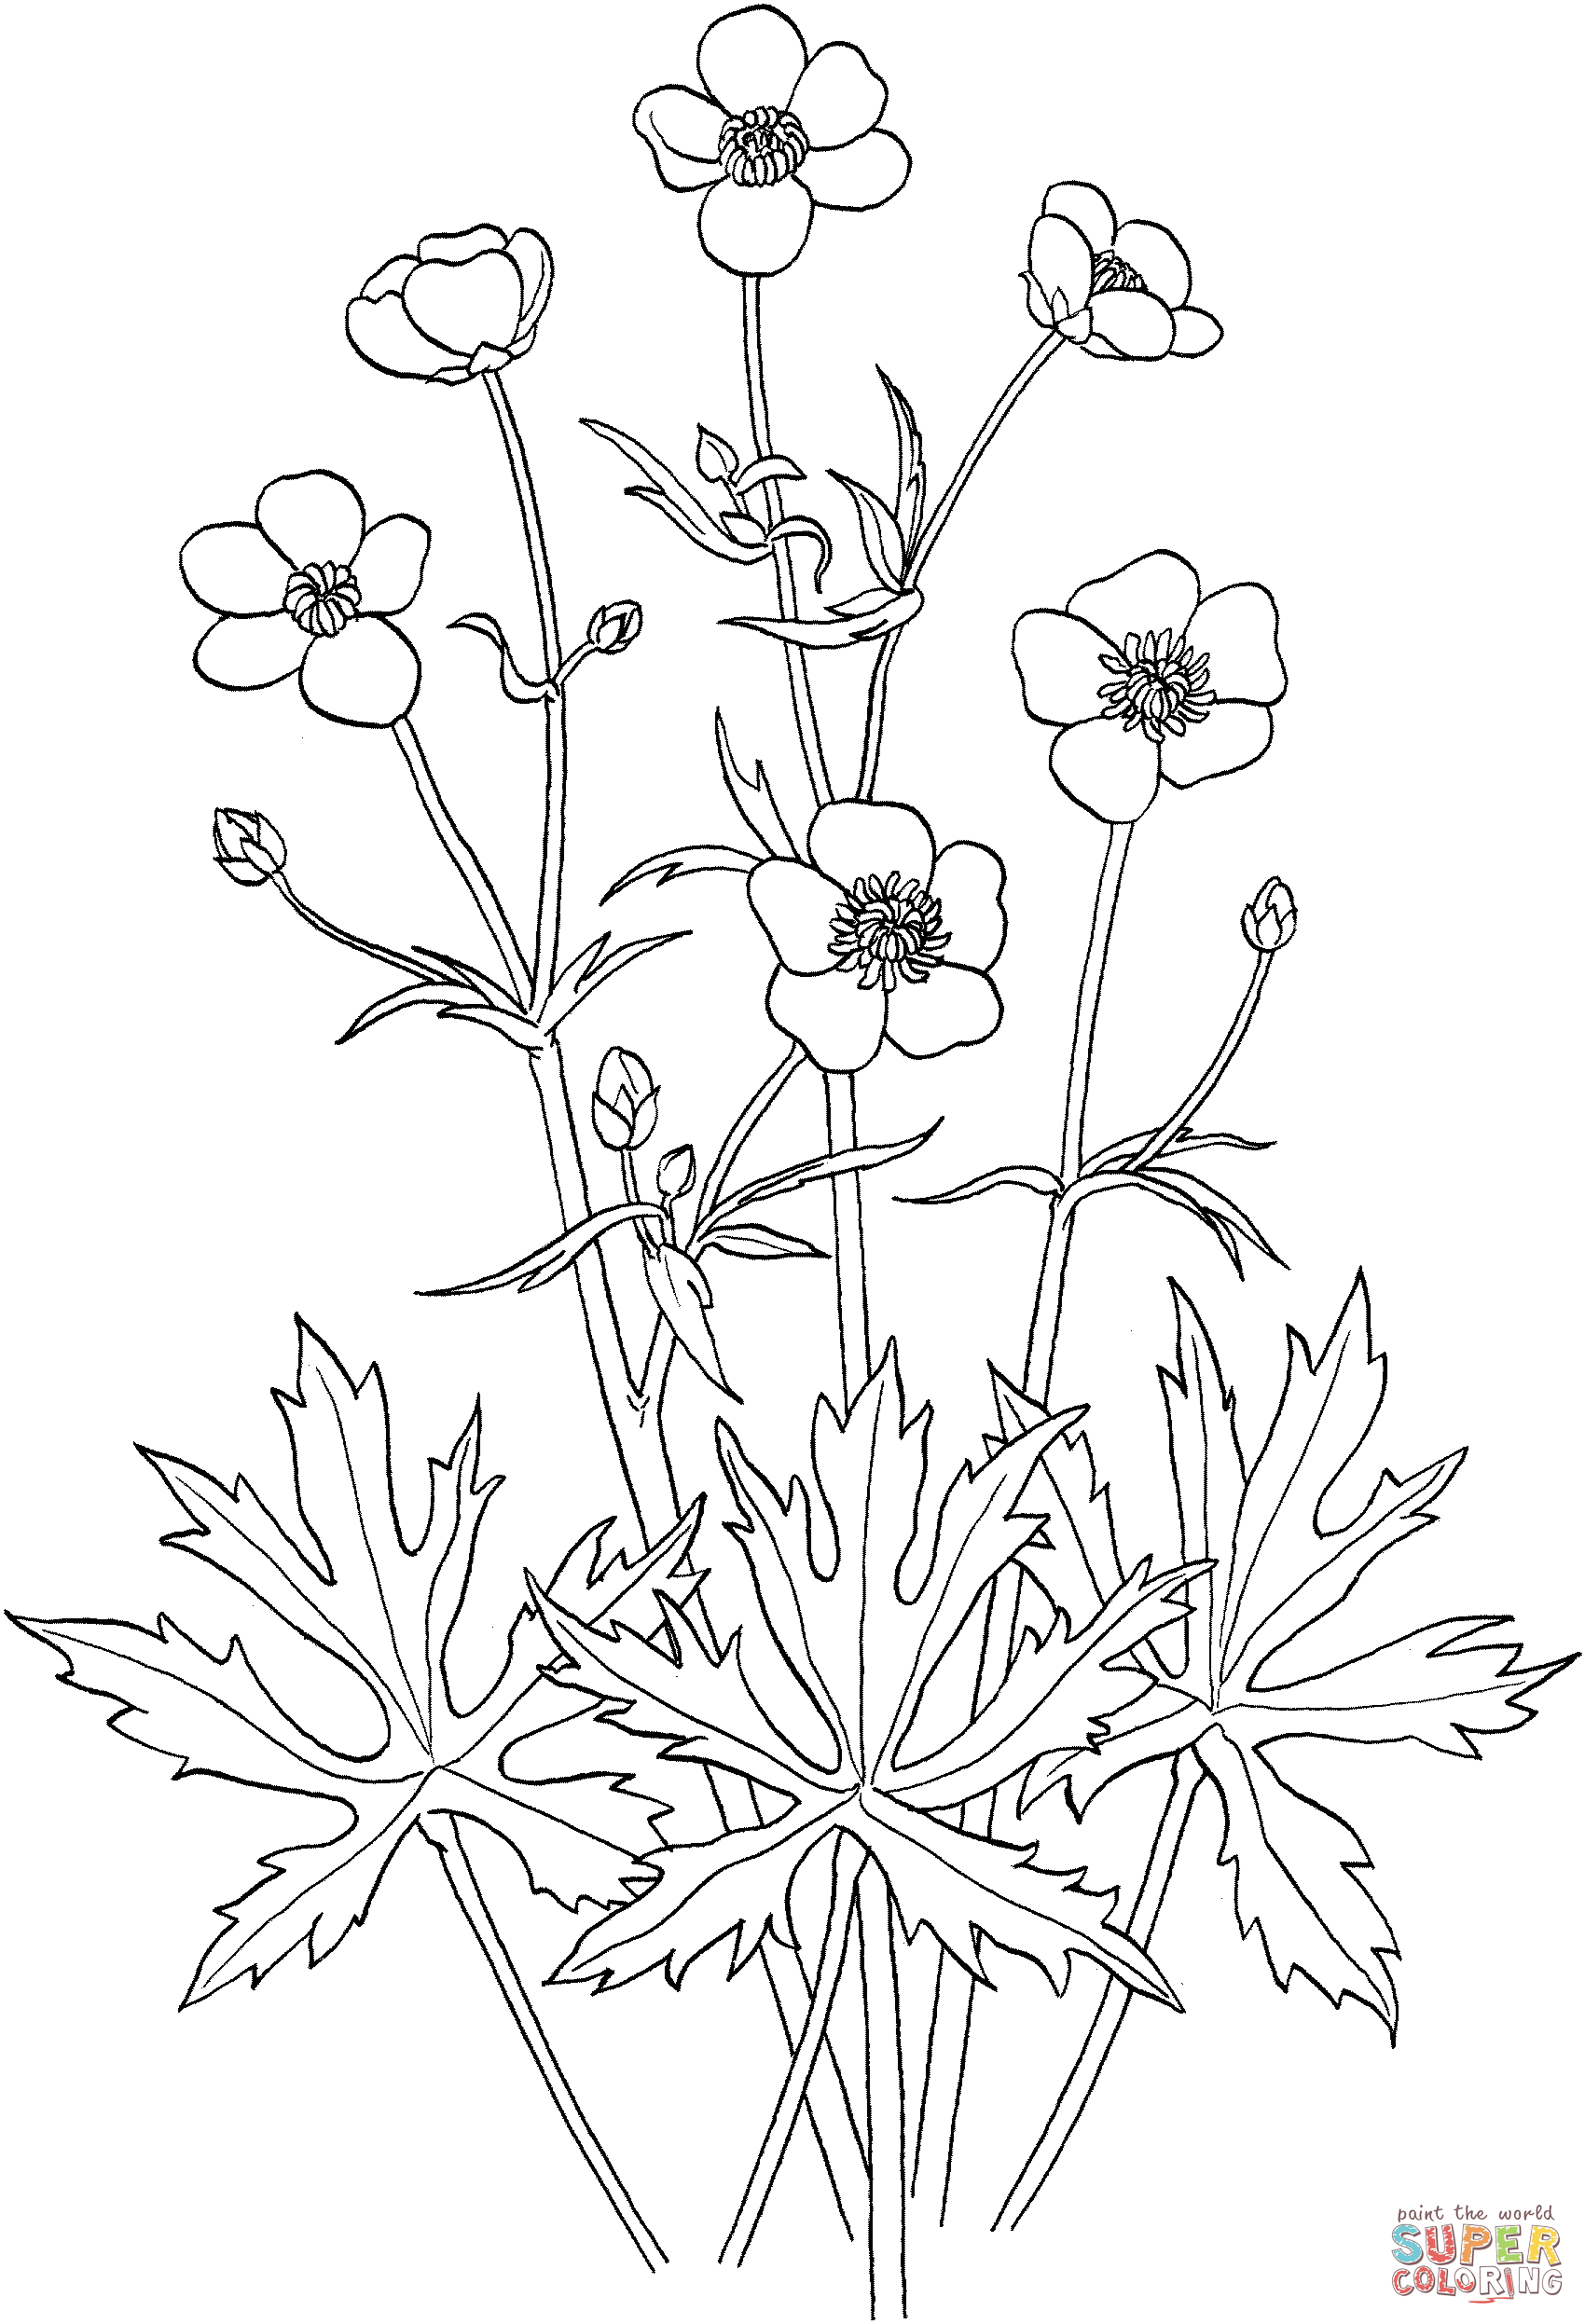 Ranunculus Acris Or Tall Buttercup Coloring Pages